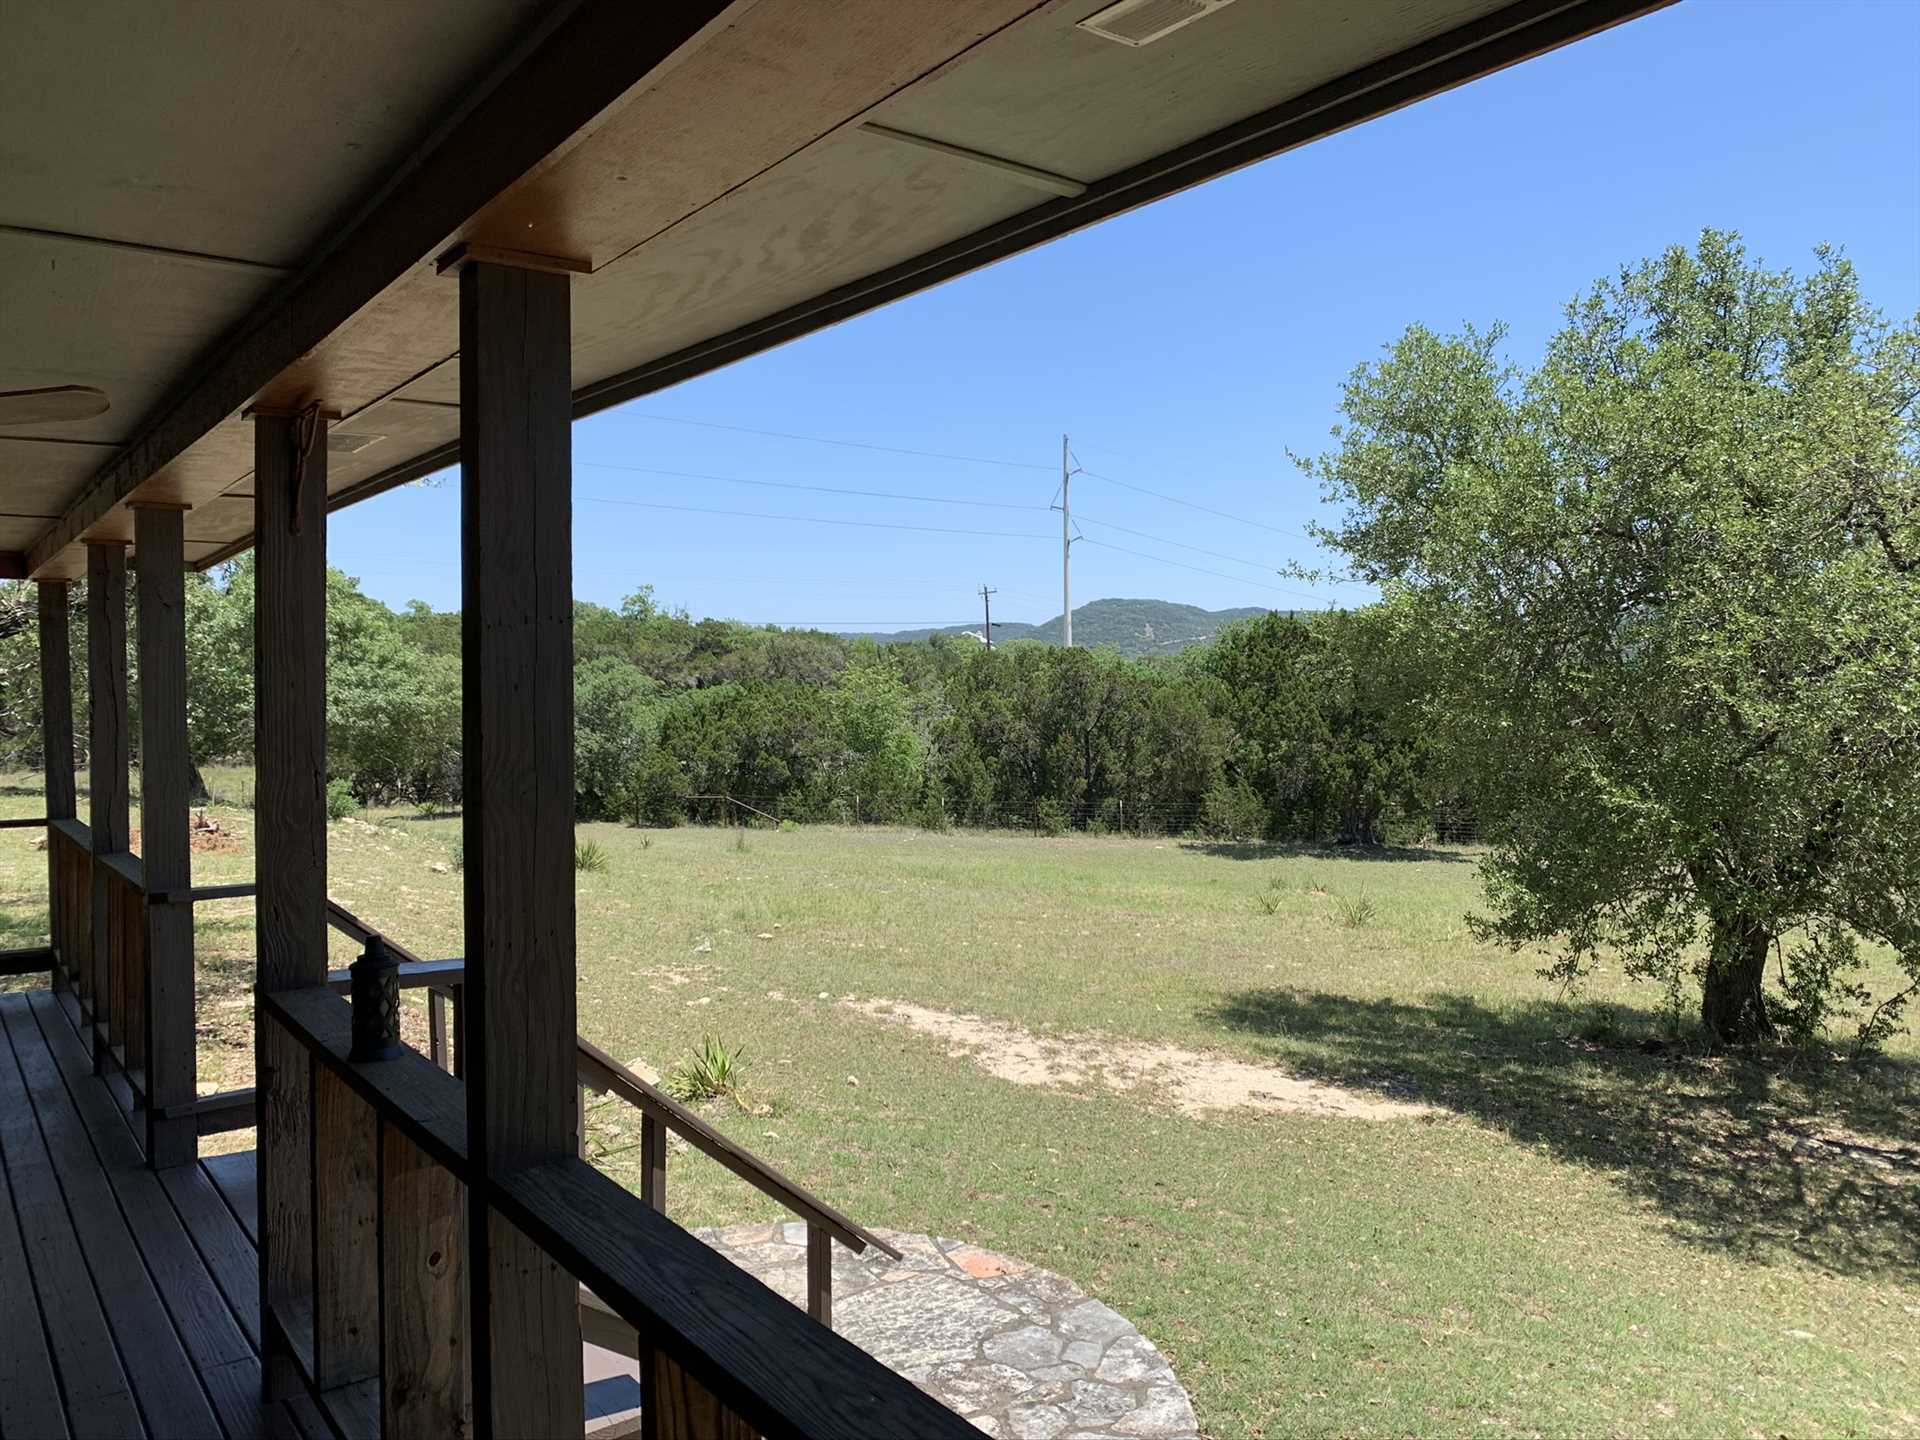                                                 No matter the time of year, or the time of day, the view from the shaded porch shows off the very best of the Texas Hill Country.